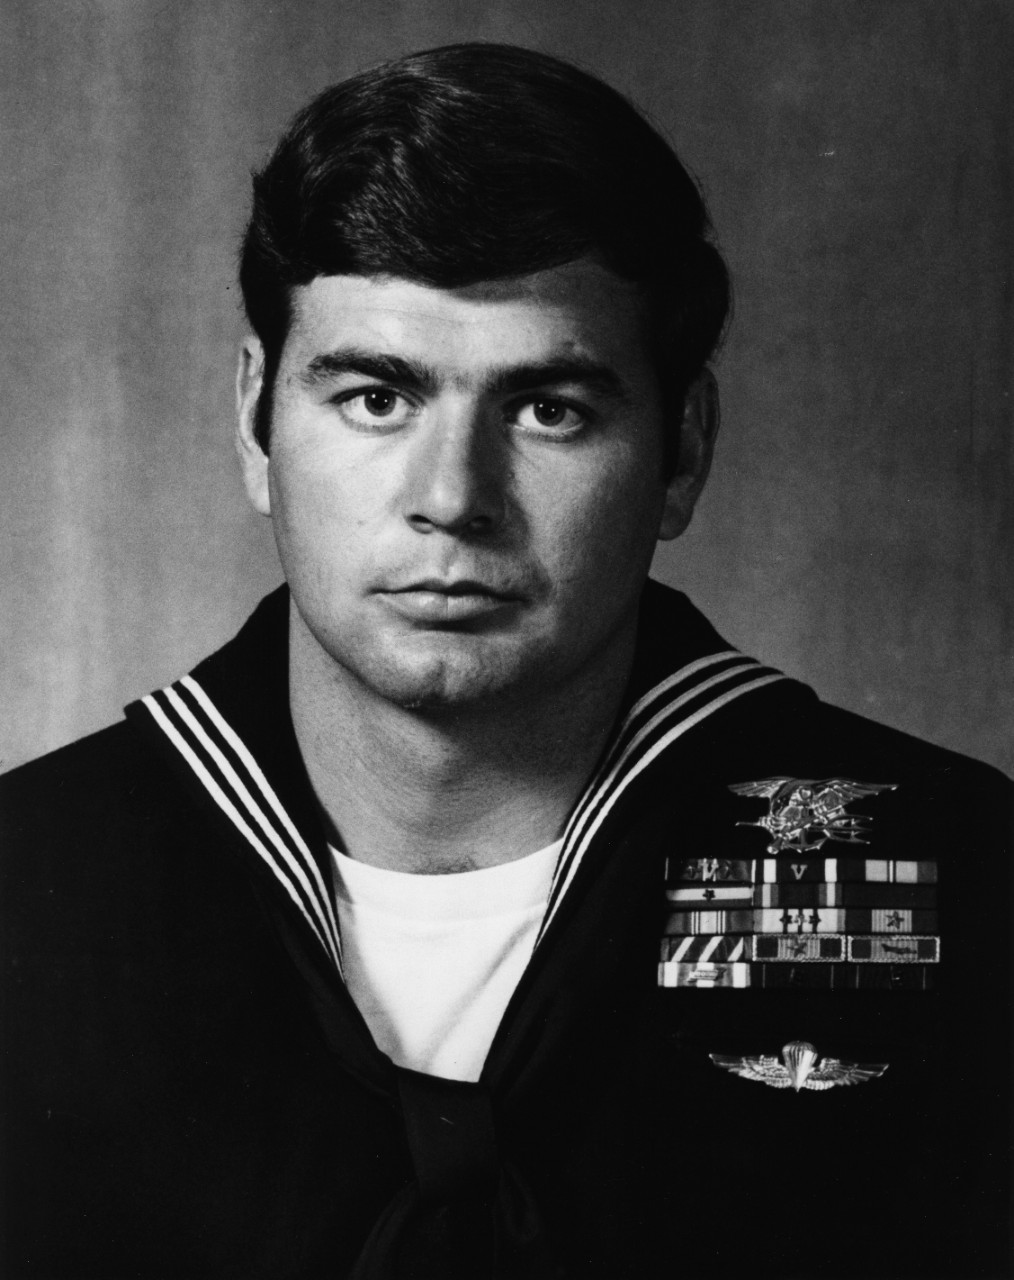 Engineman First Class Michael E. Thornton, Medal of Honor recipient